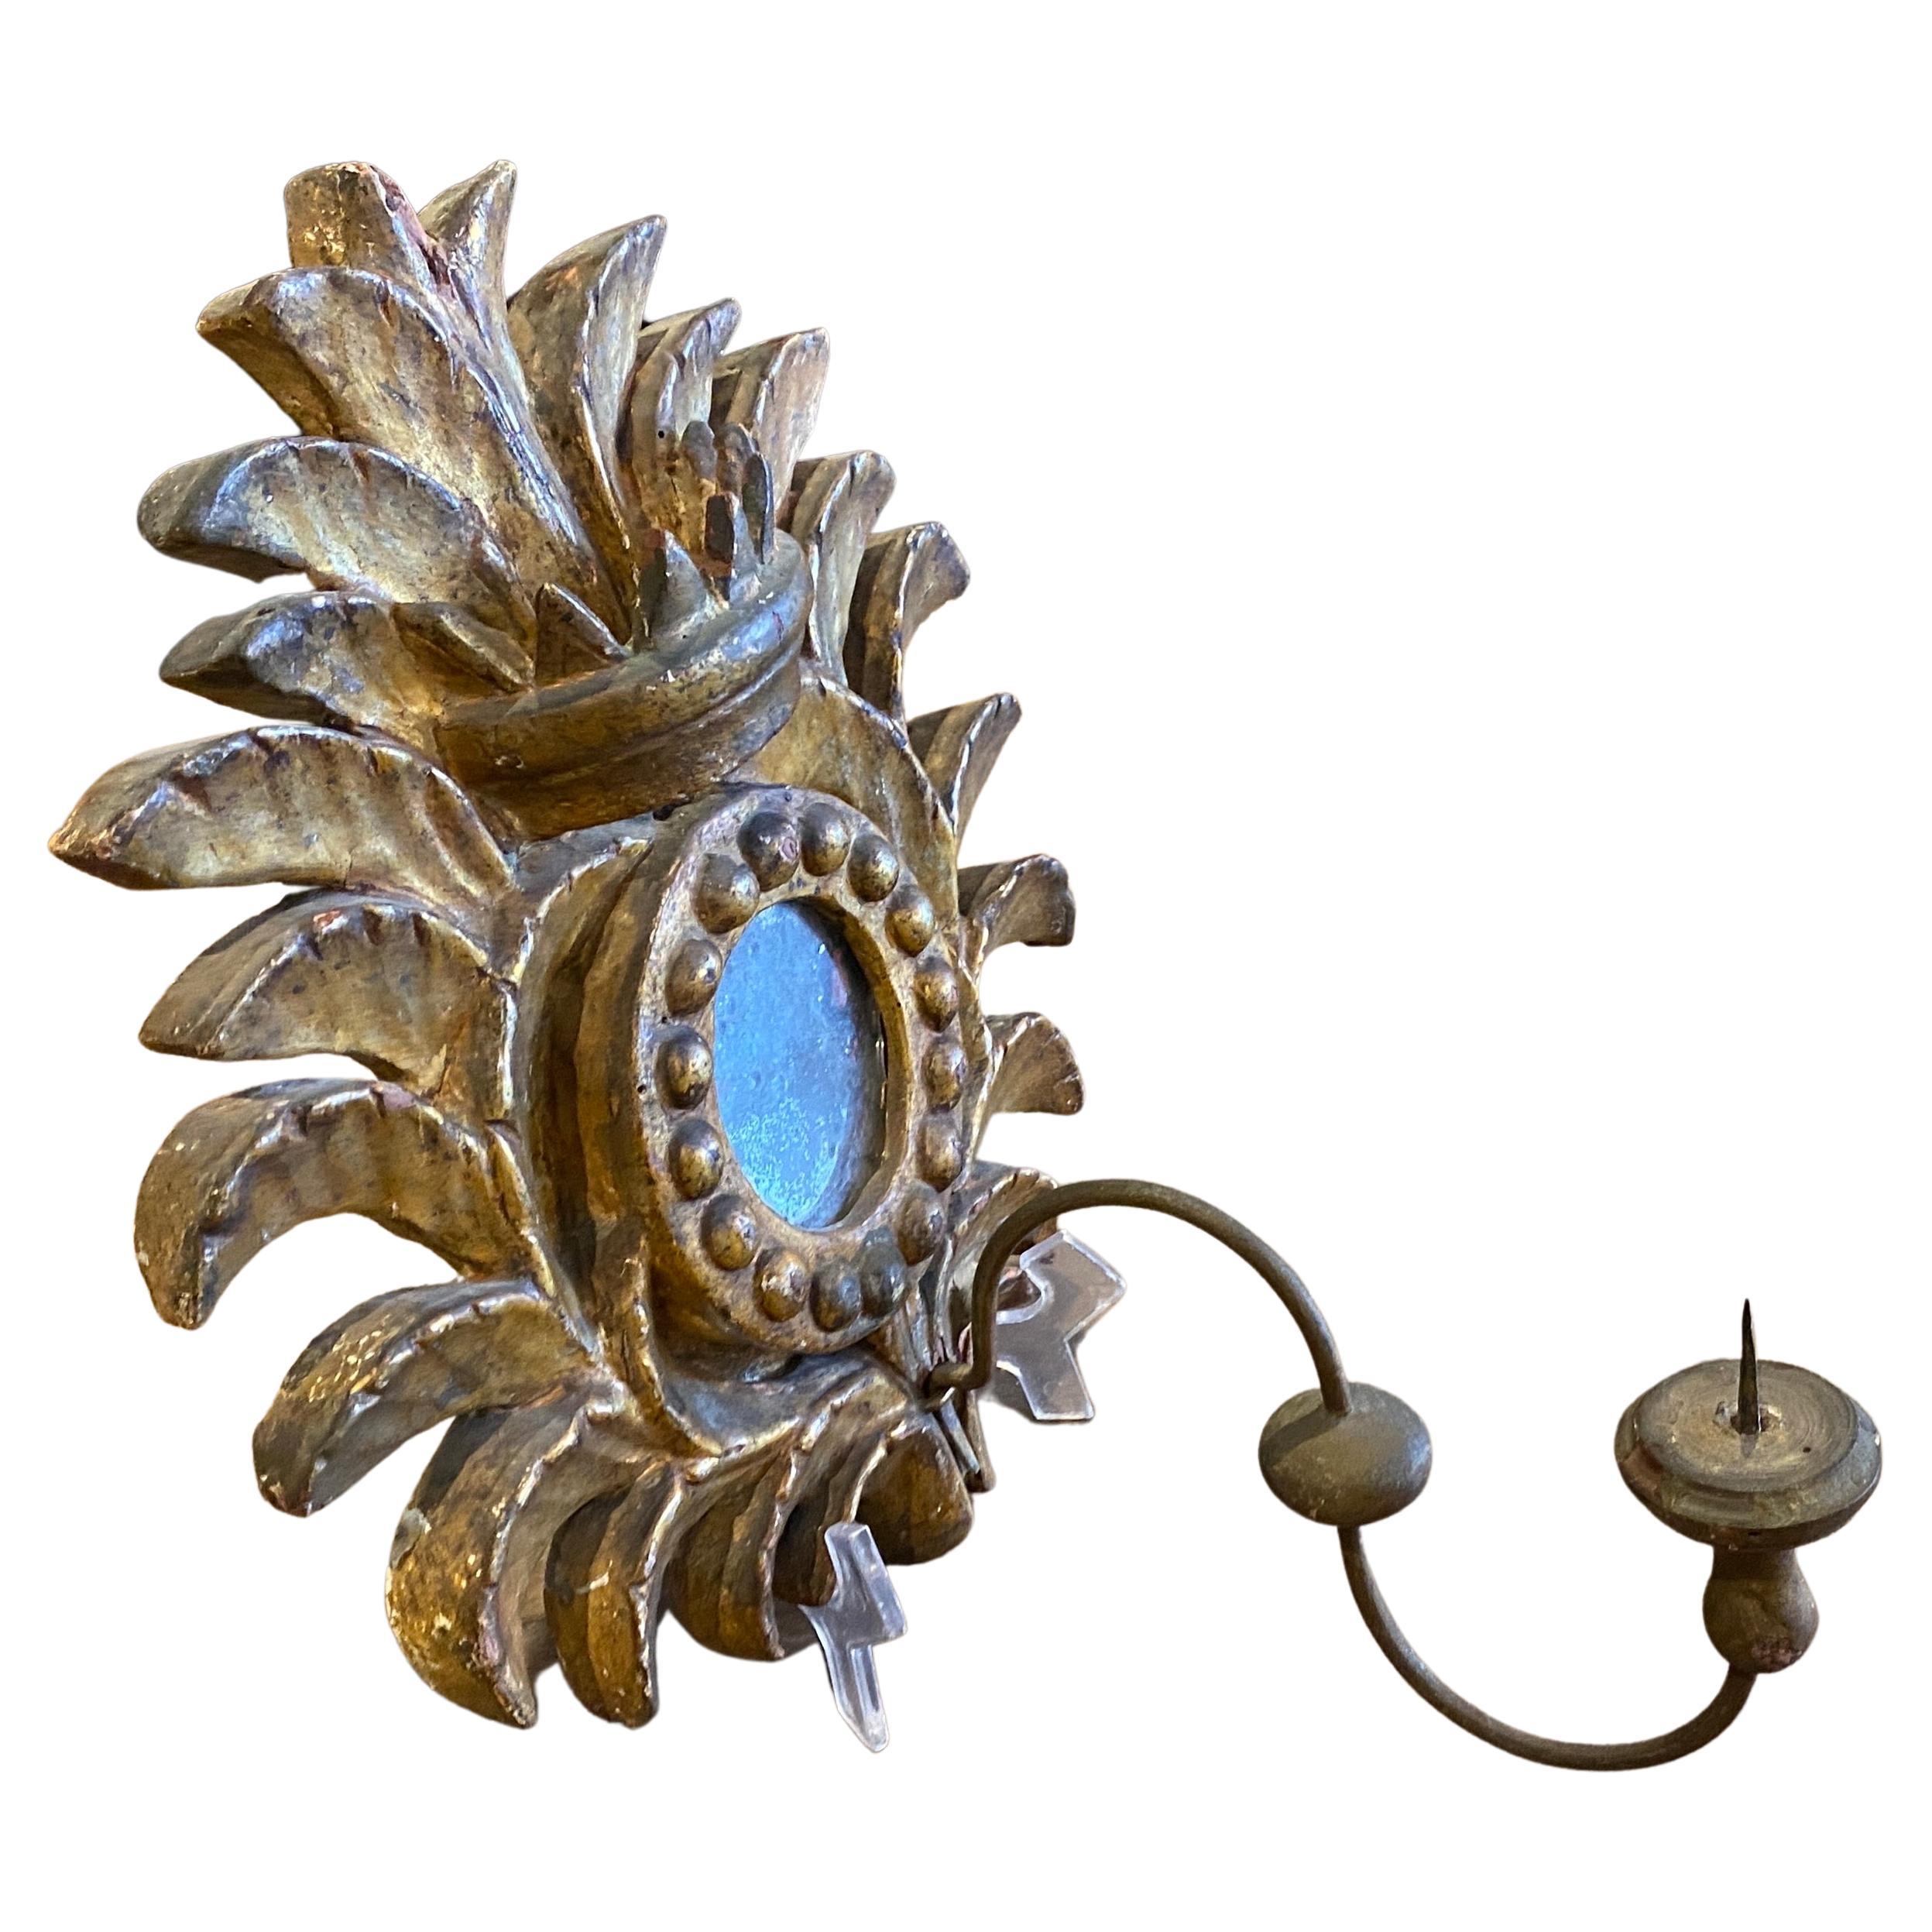 A pair of antique Louis XV gilt wood candle sconces manufactured in Sicily in the Mid-18th century, they were used probably for a private church, they are in original conditions and patina.